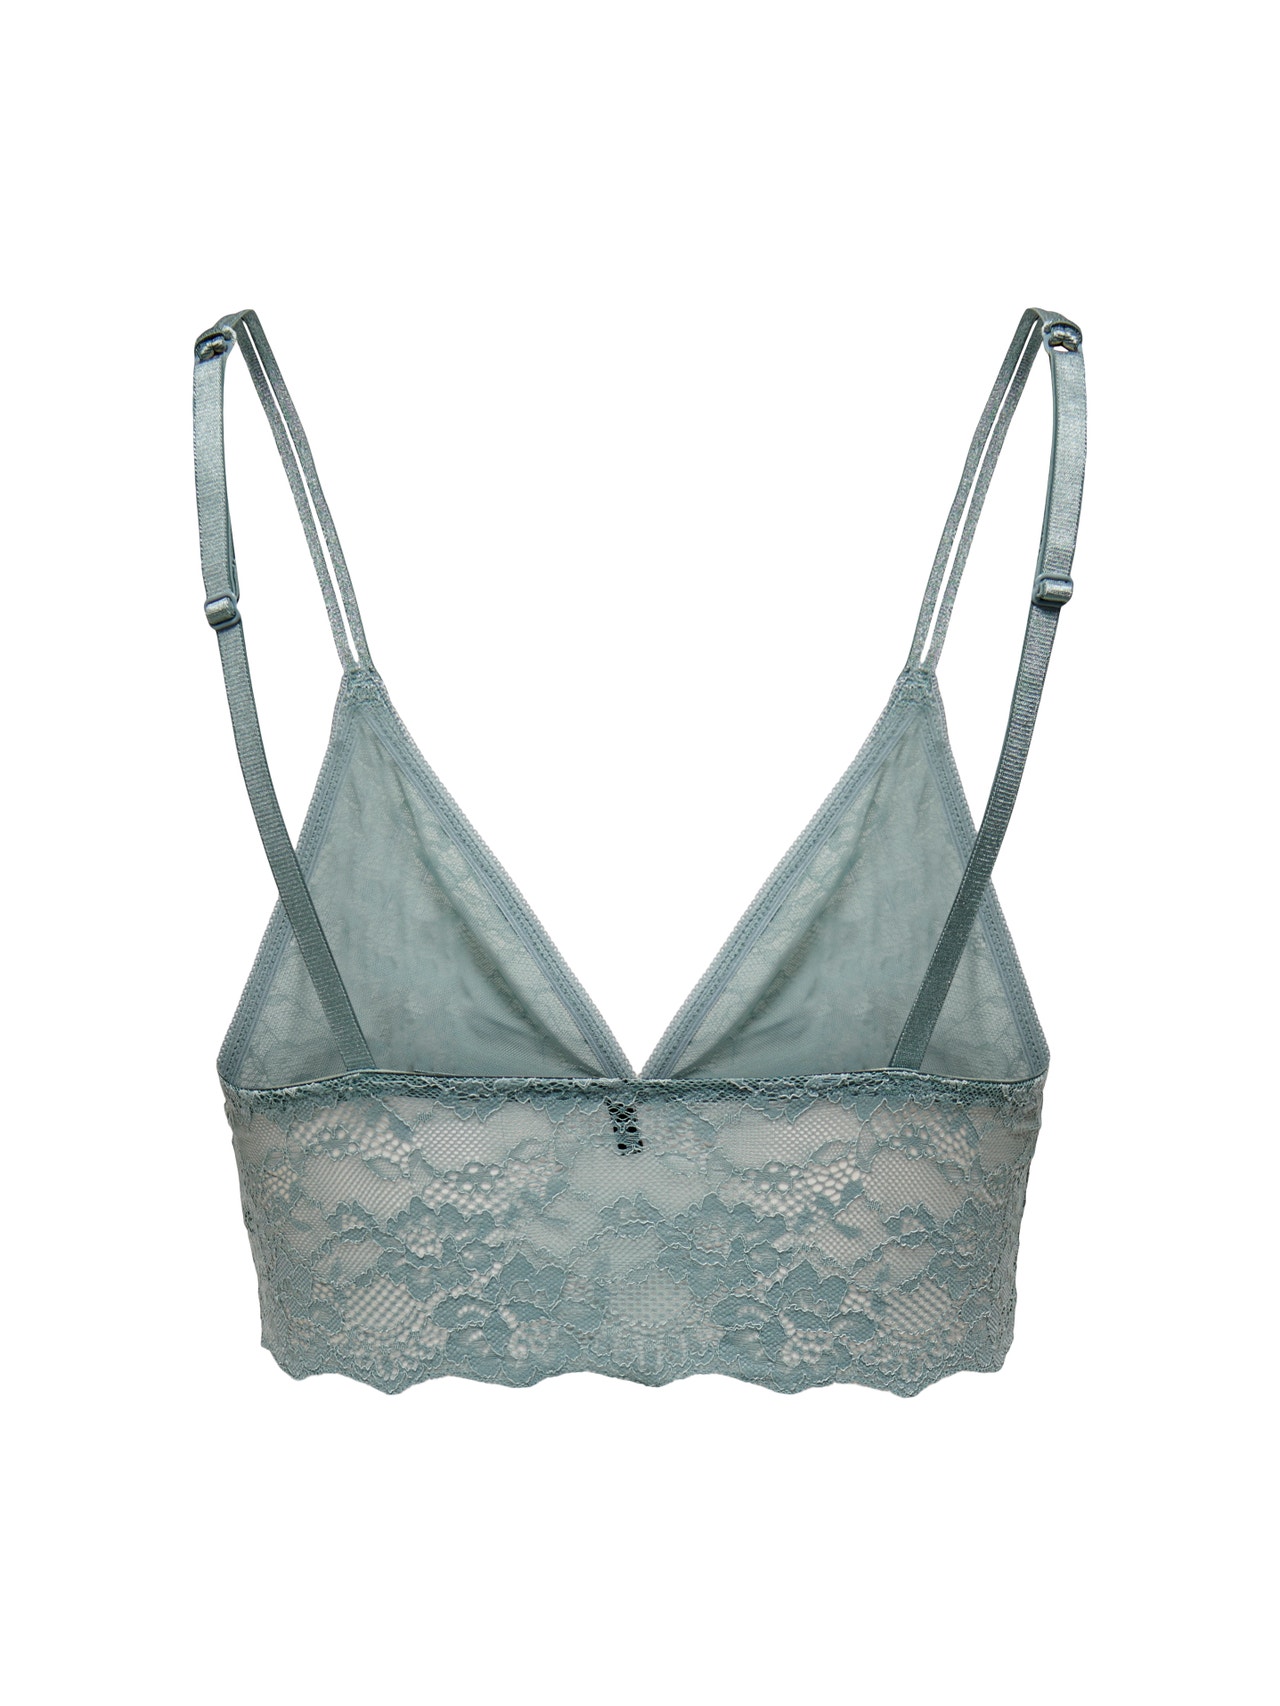 ONLY Bras -Stormy Sea - 15280854